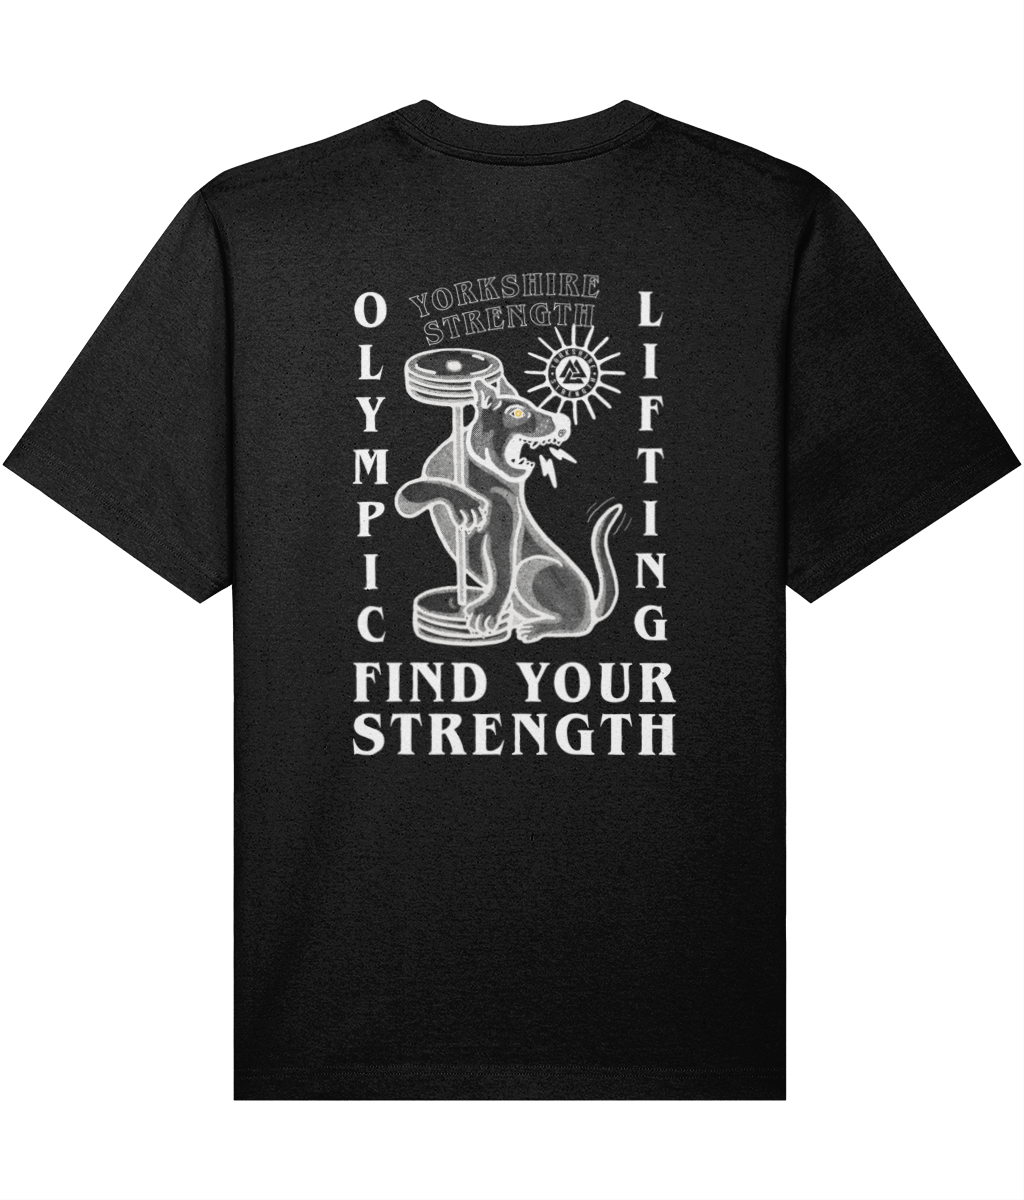 Find Your Strength oversized t-shirt - Yorkshire Strength